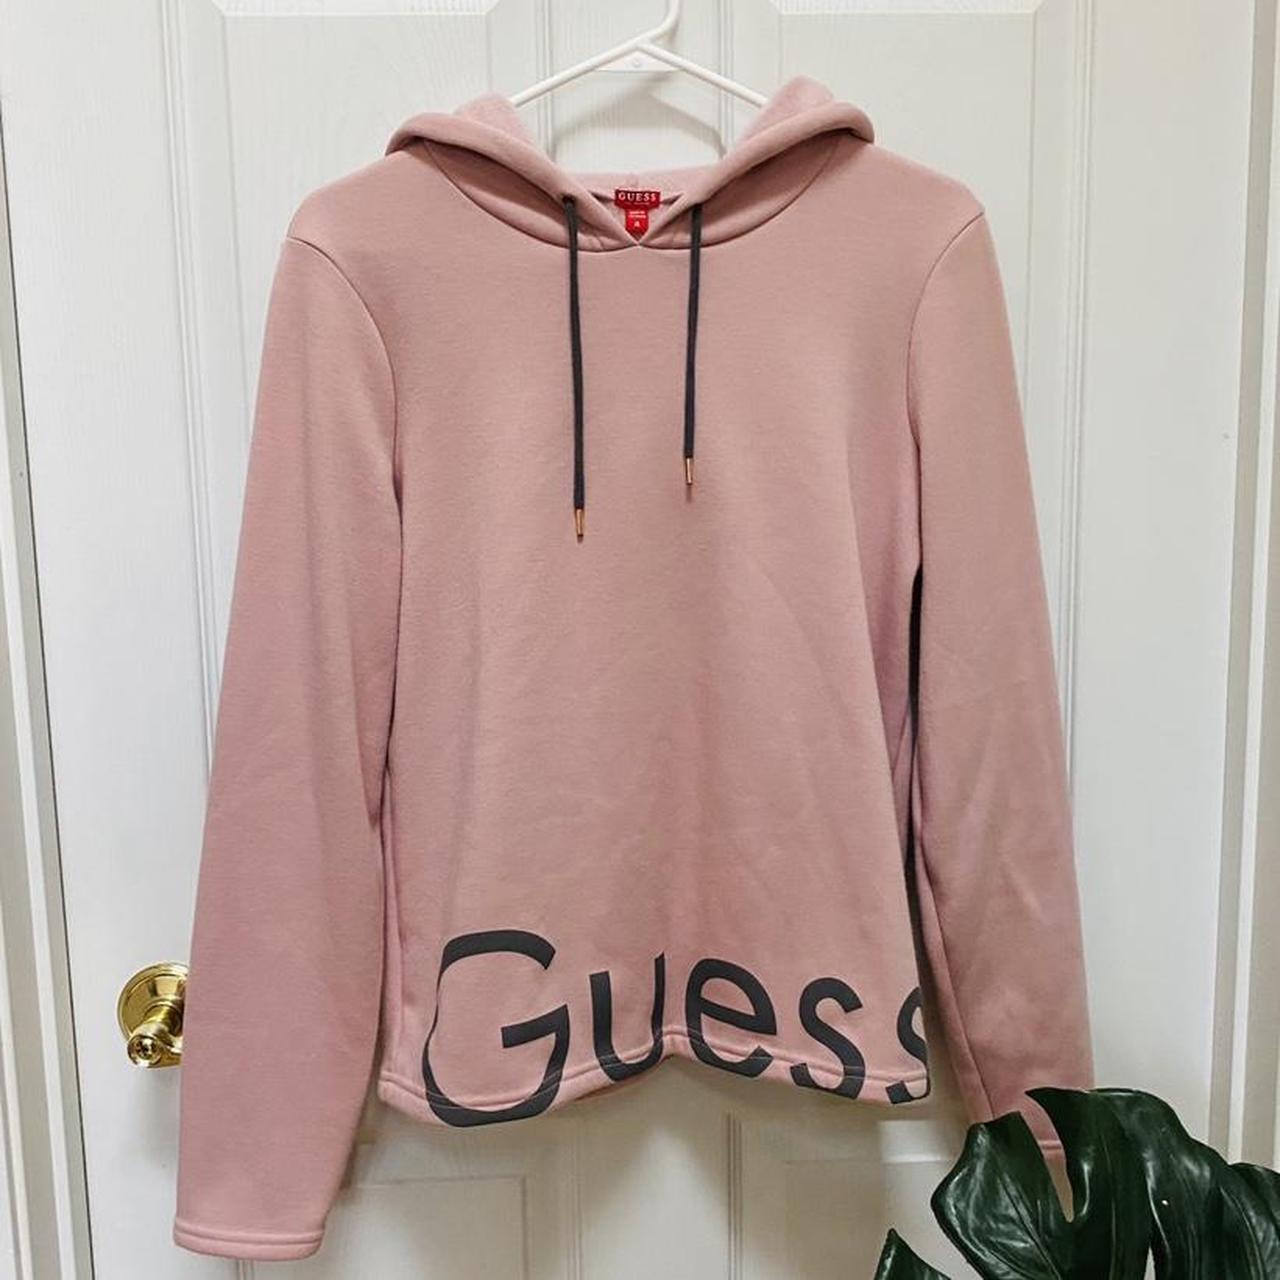 Guess Women's Grey and Pink Hoodie (3)